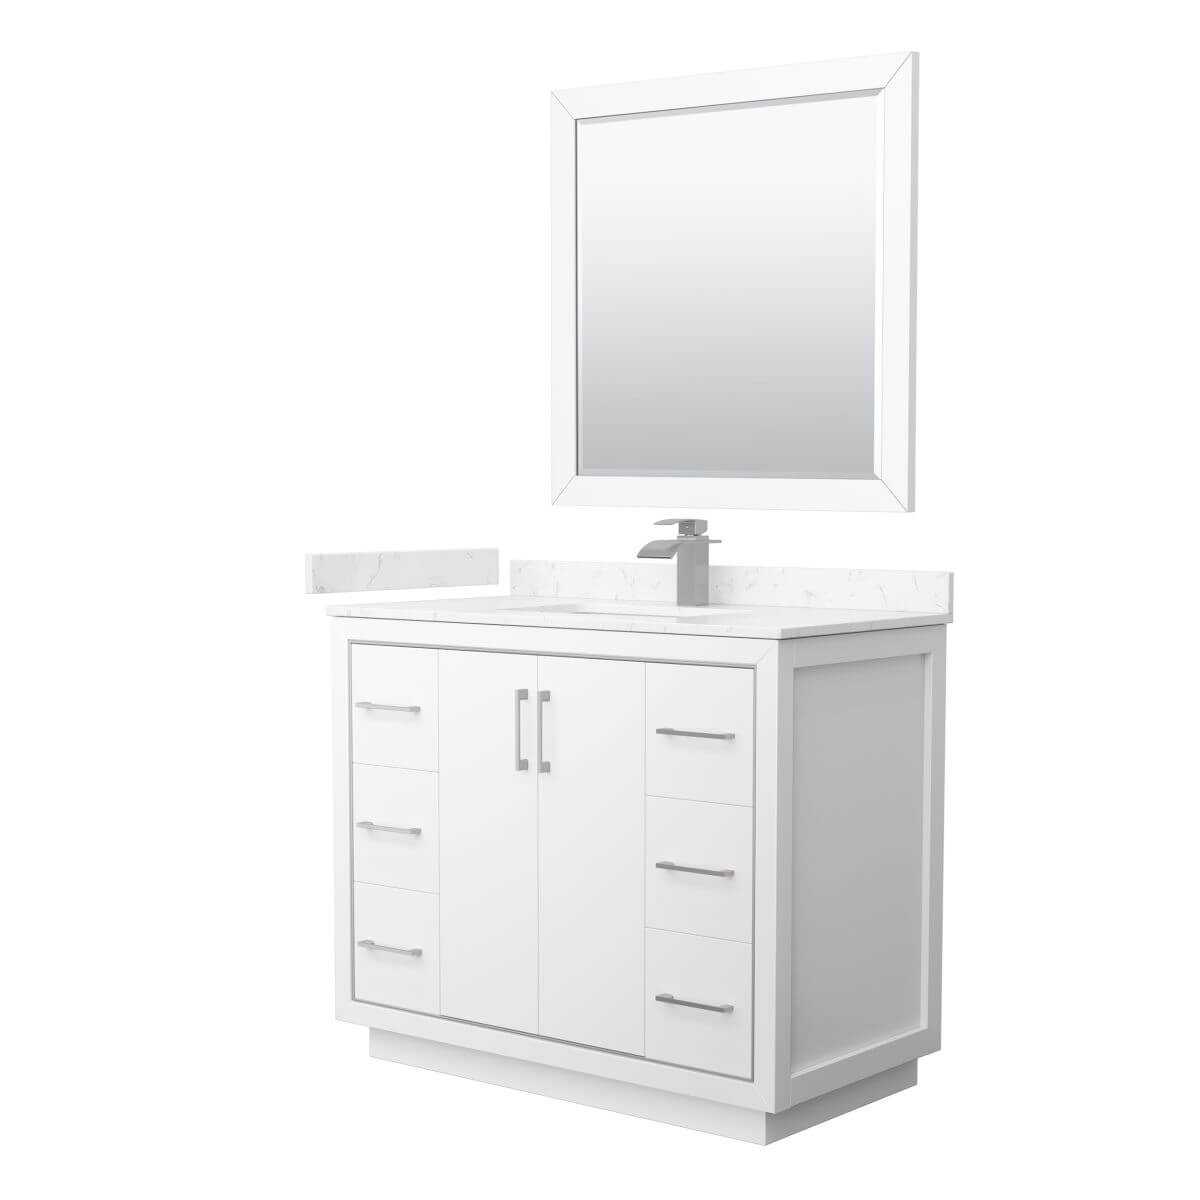 Wyndham Collection WCF111142SWHC2UNSM34 Icon 42 inch Single Bathroom Vanity in White with Carrara Cultured Marble Countertop, Undermount Square Sink, Brushed Nickel Trim and 34 Inch Mirror